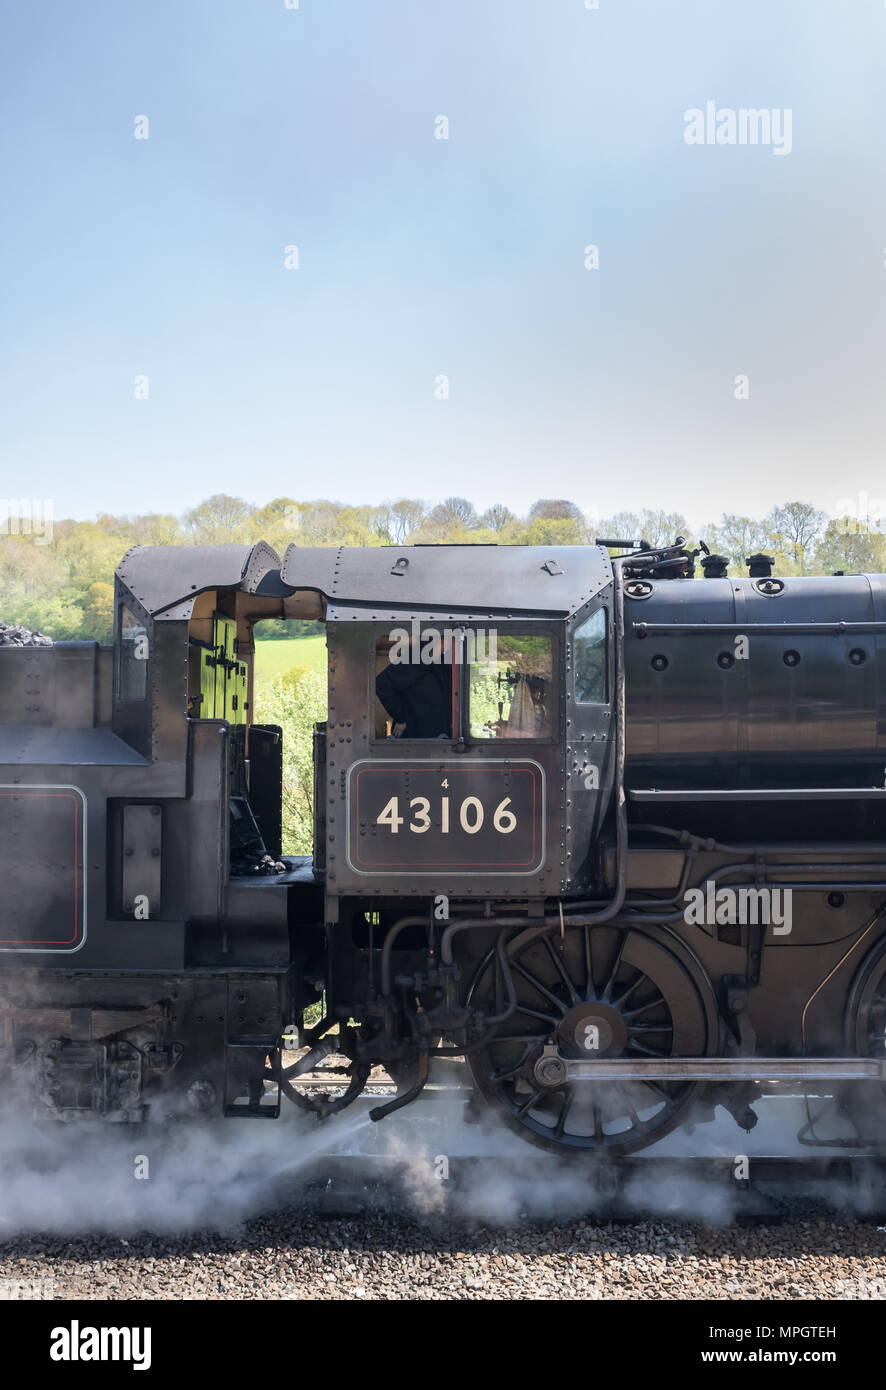 Close-up, portrait side view of vintage UK steam train 43106 passing through English countryside on sunny day, train crew inside locomotive cab. Stock Photo